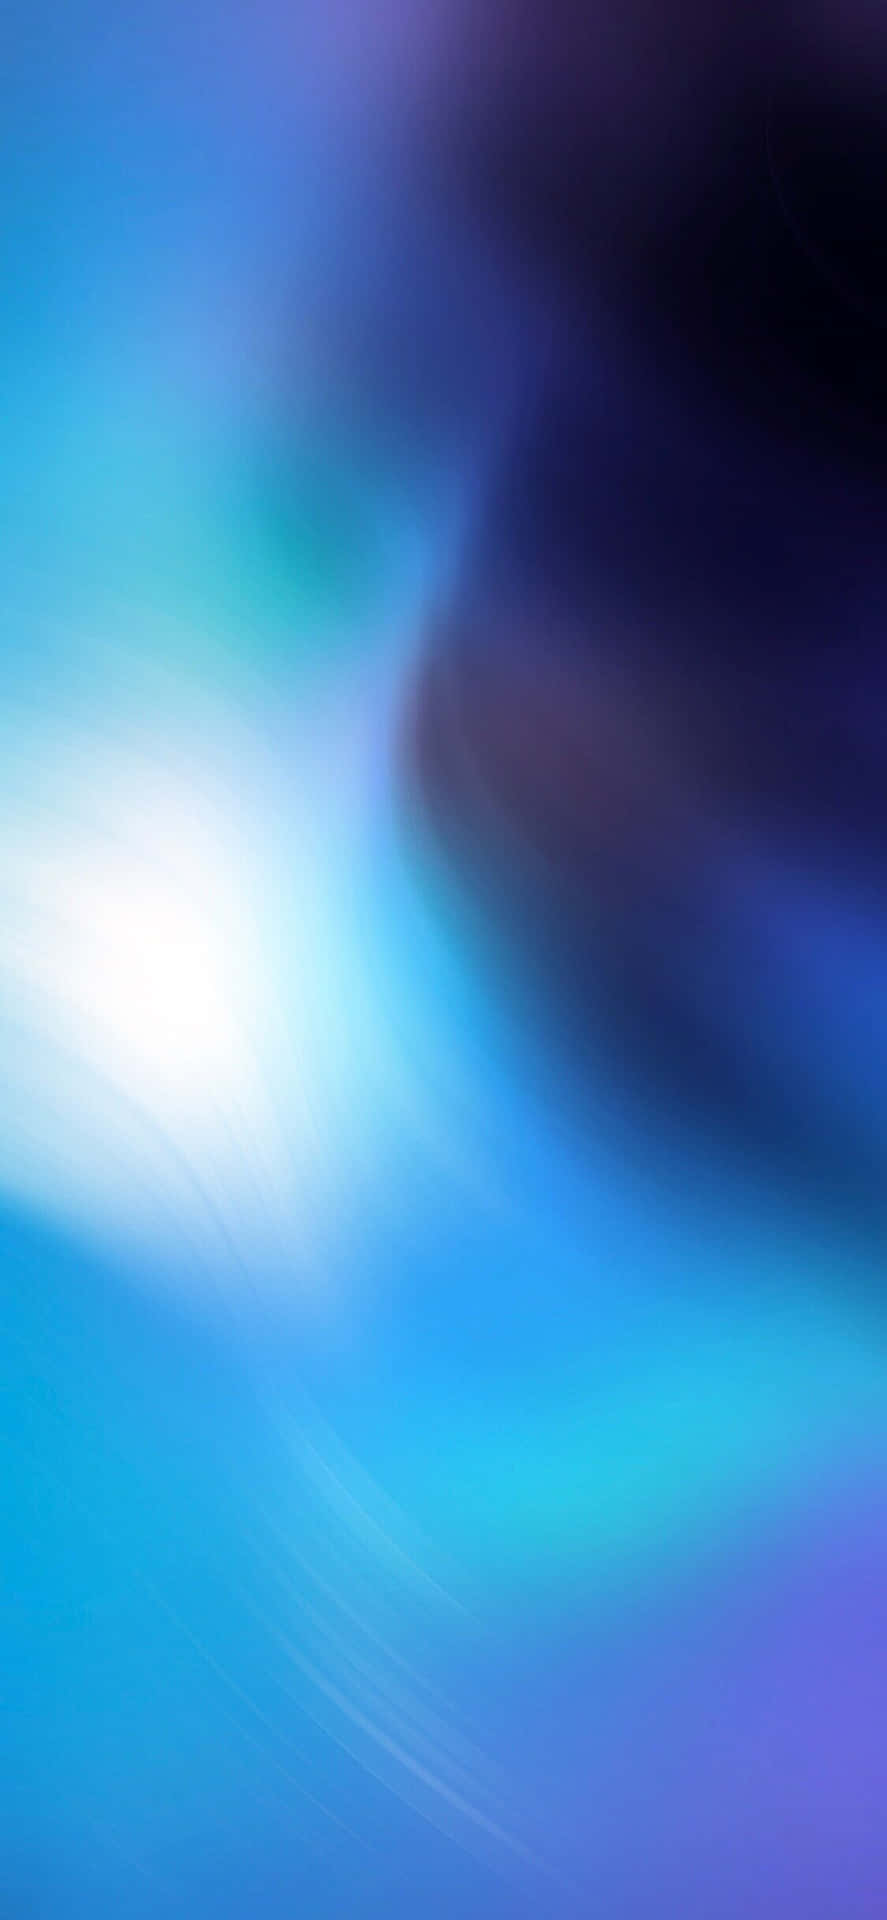 Download Cool Blue Abstract Iphone Wallpaper | Wallpapers.com